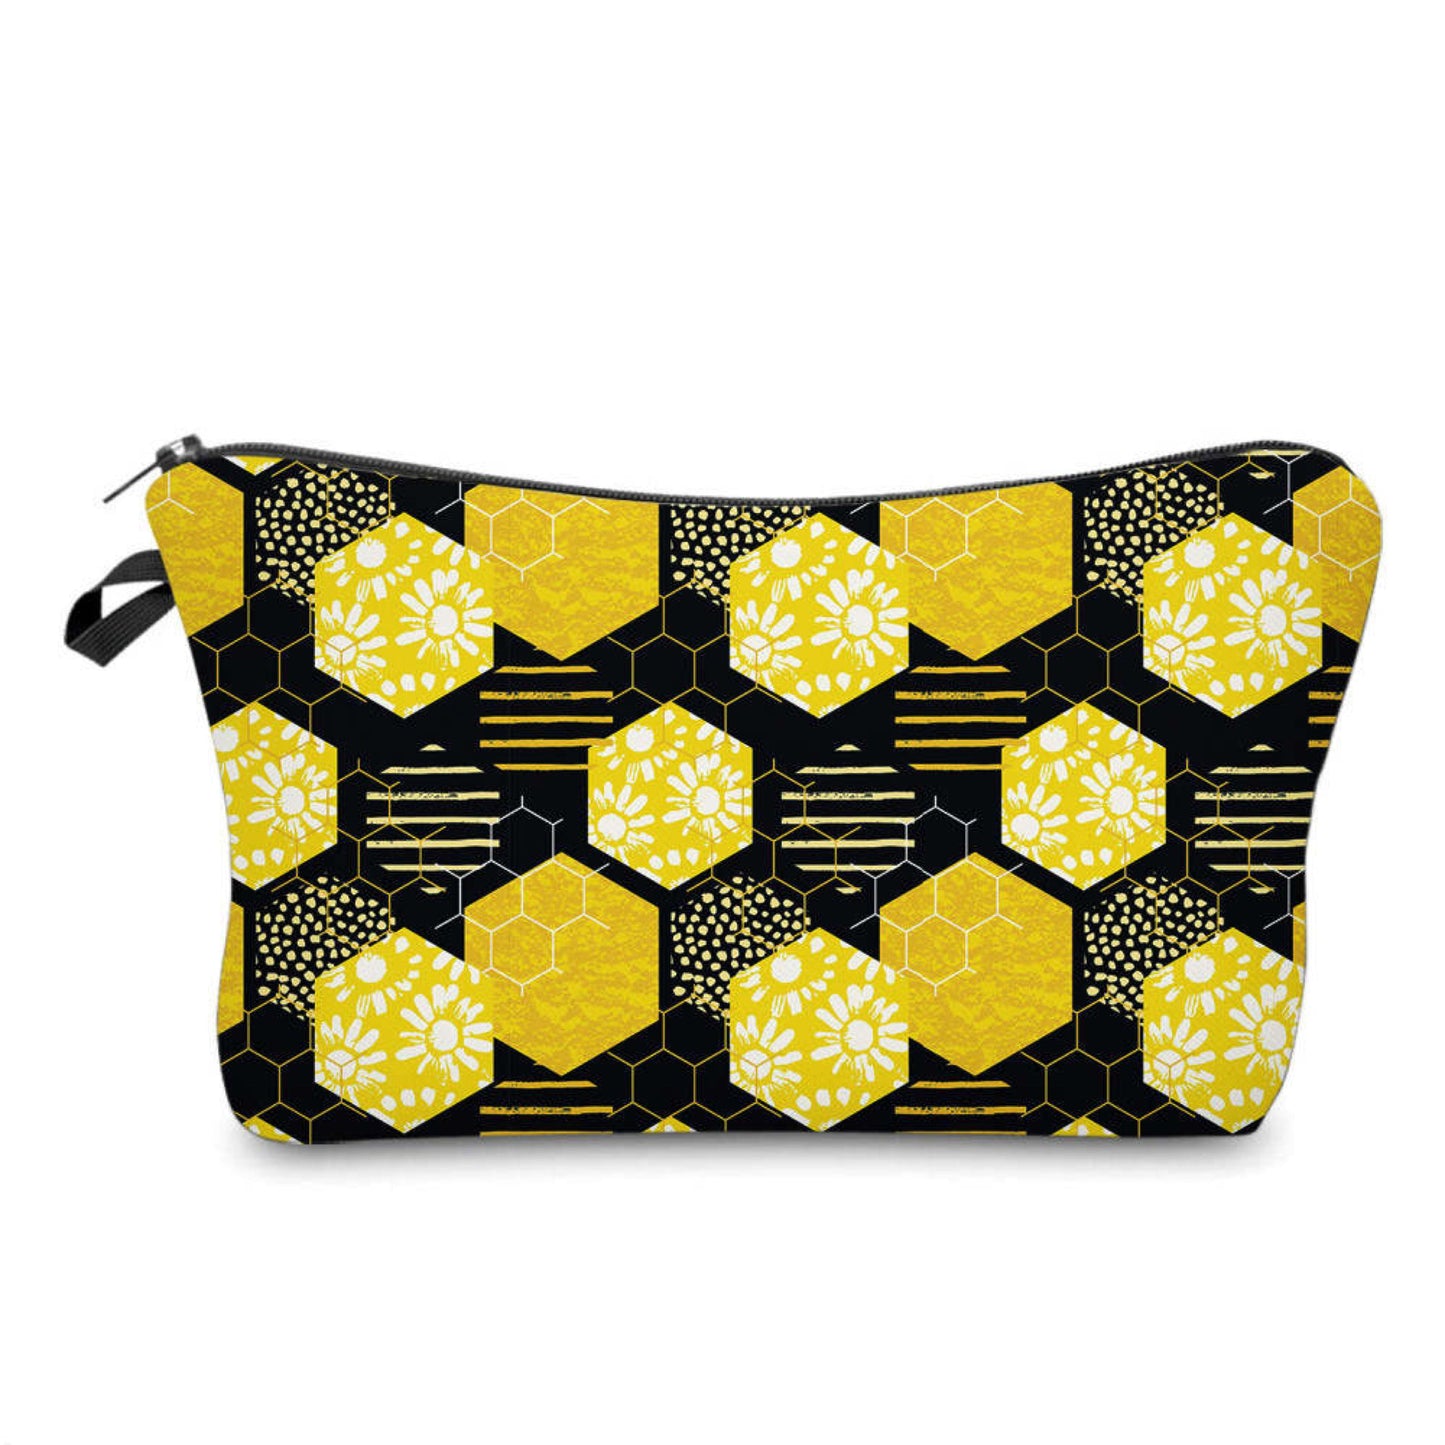 Pouch - Bee Honeycomb Black Yellow *While Supplies Last*